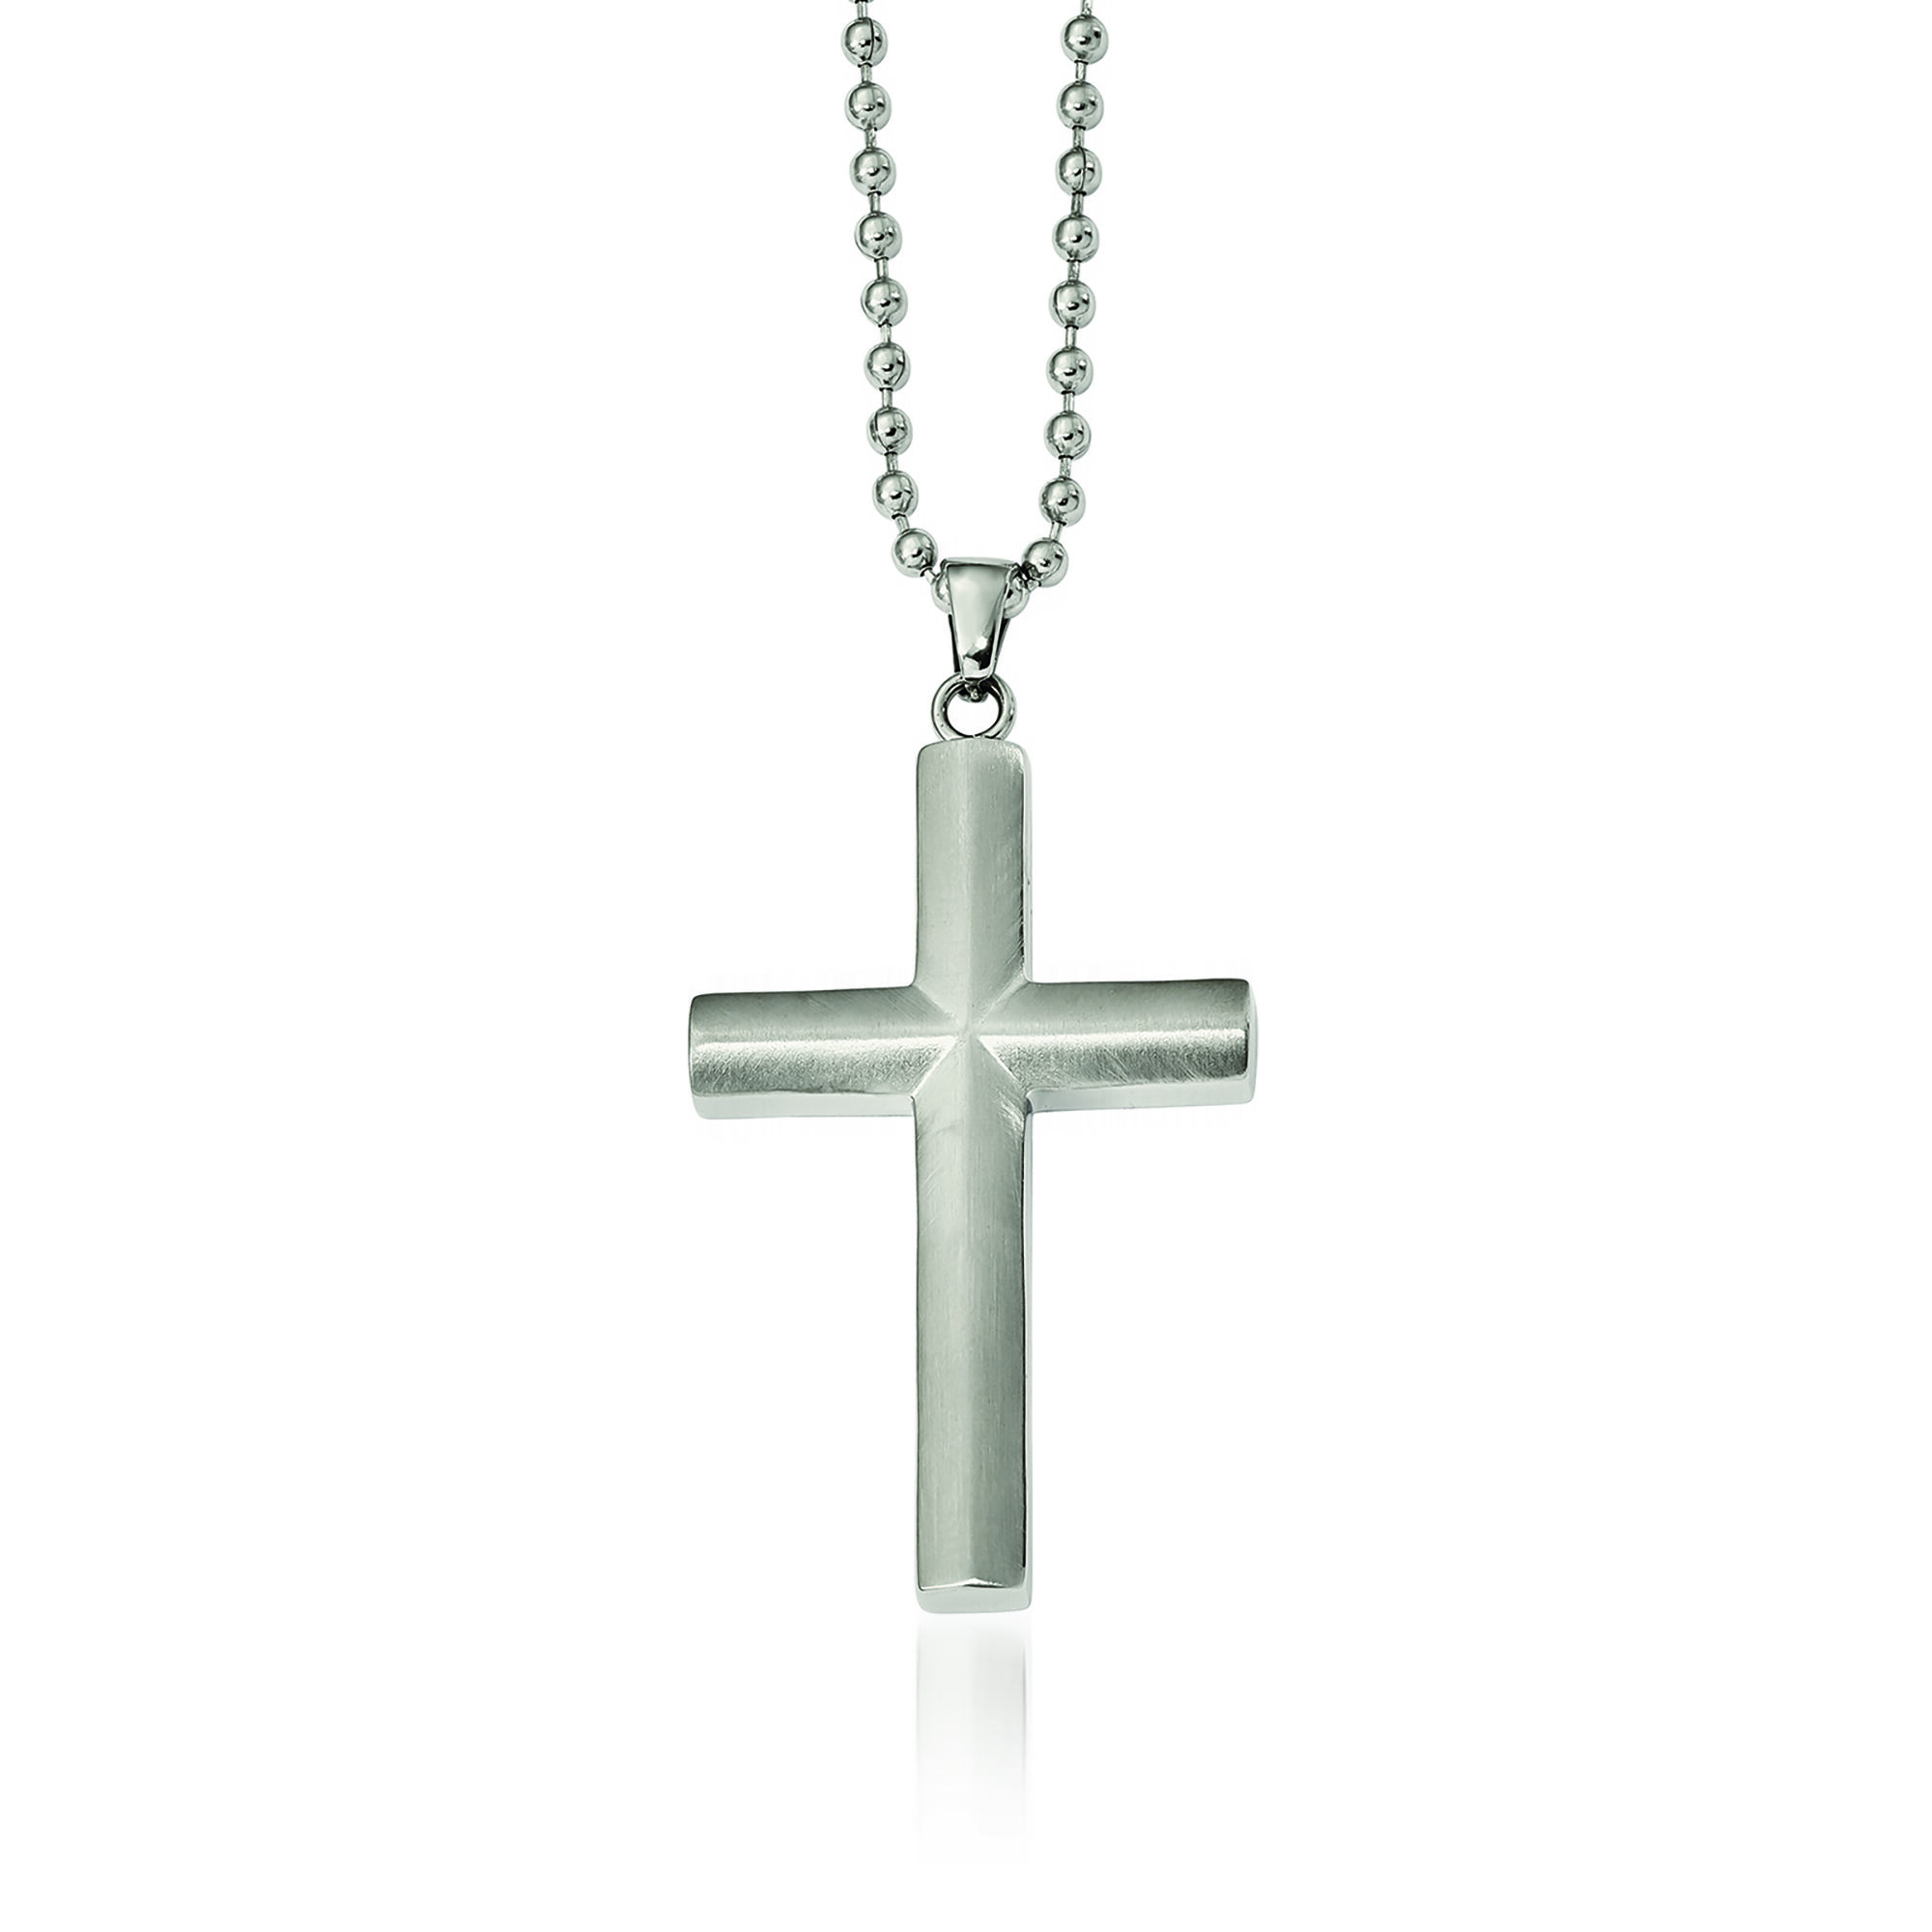 Men/'s Silver Tone Necklace Vintage Religious Cross Stainless Steel Pendant Chain